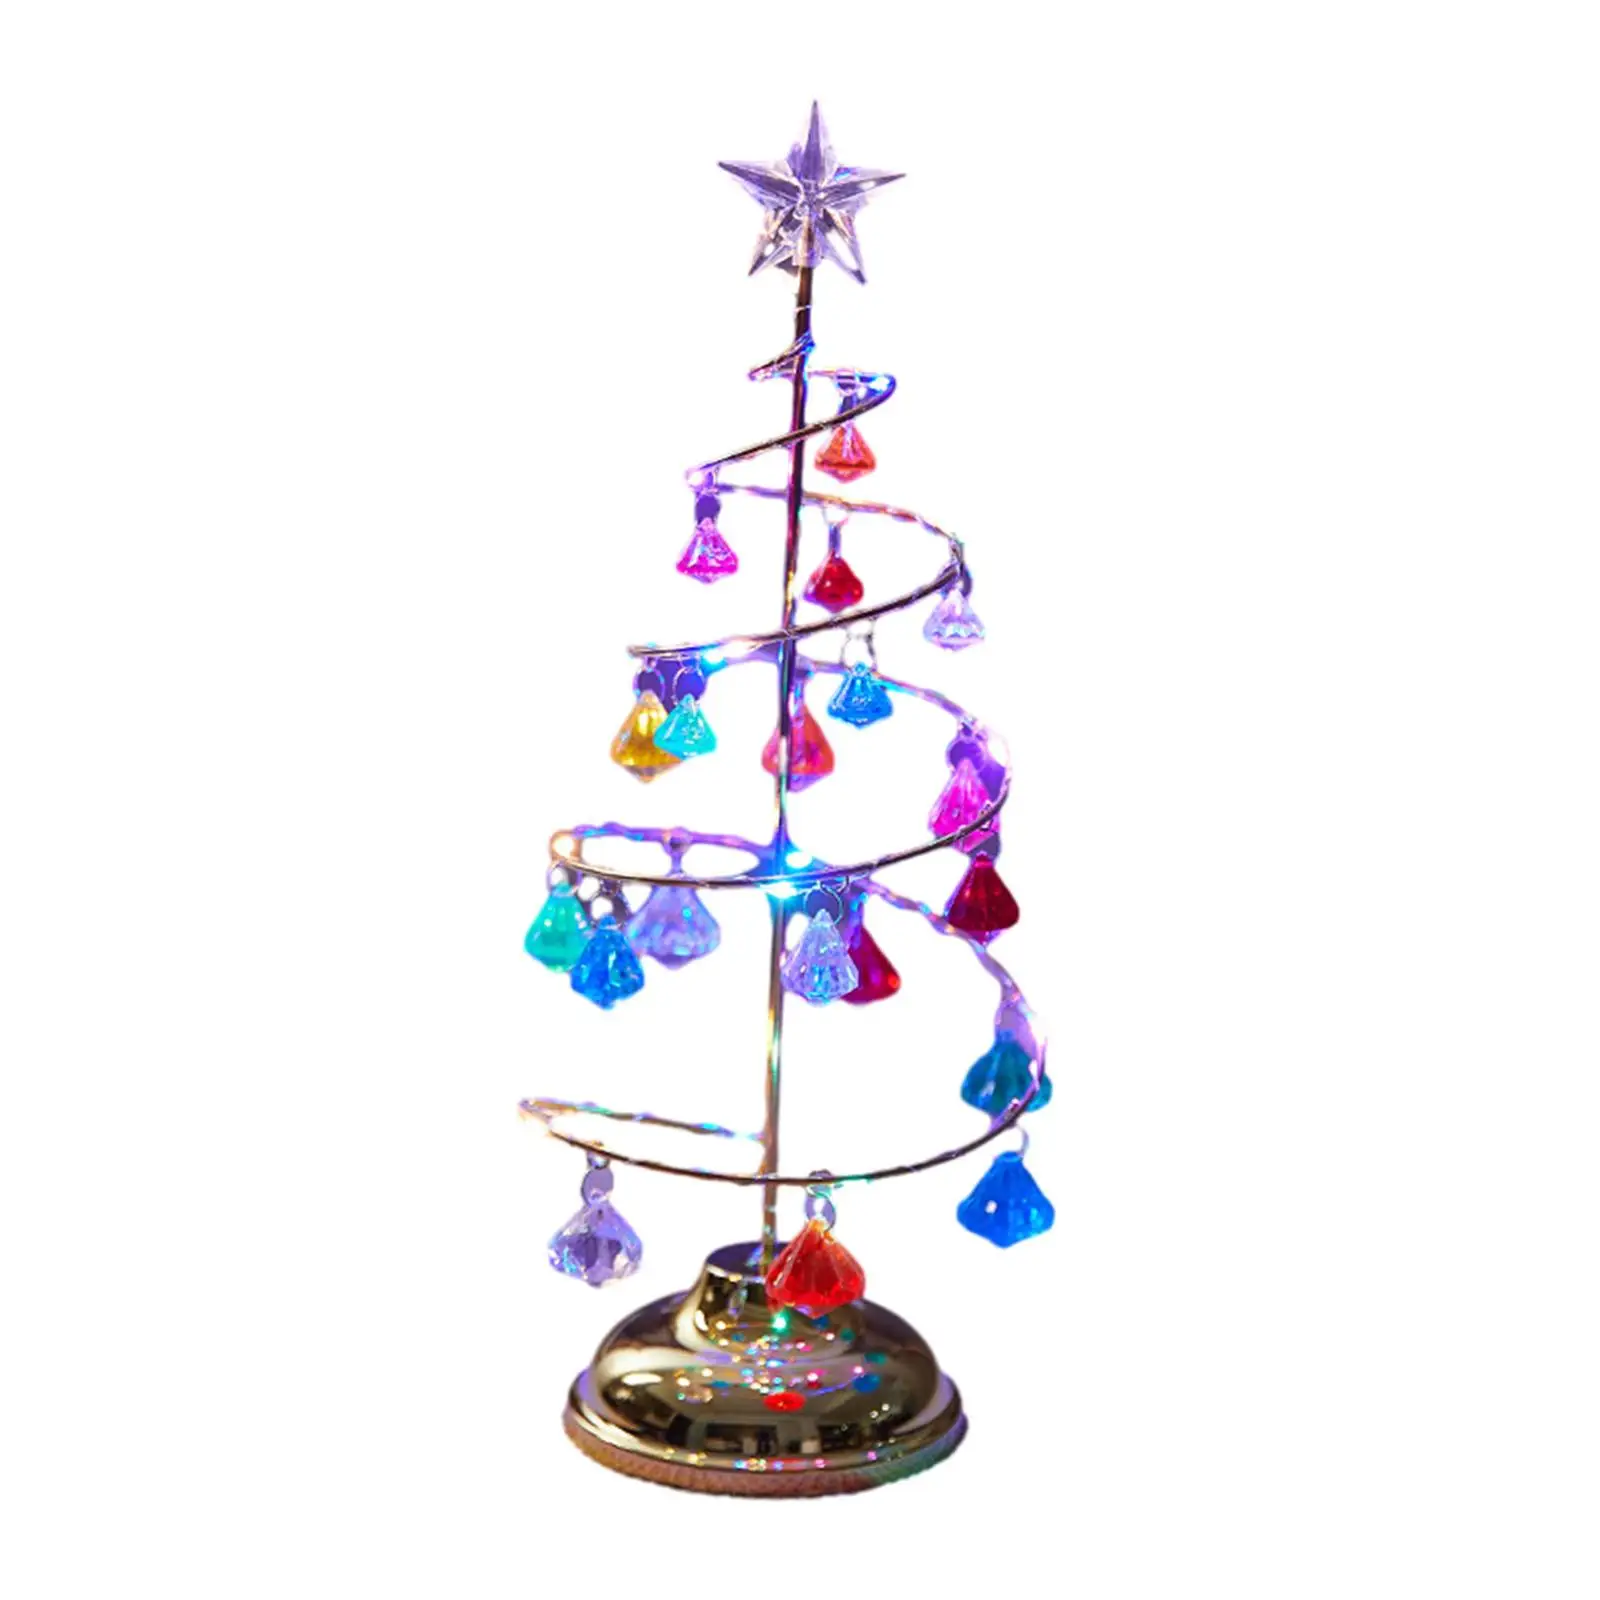 Crystal Spiral Christmas Tree Lamp Bedside Lamp Decoration Christmas Tree Lamps Ornament for Bedroom Party Xmas Winter Home